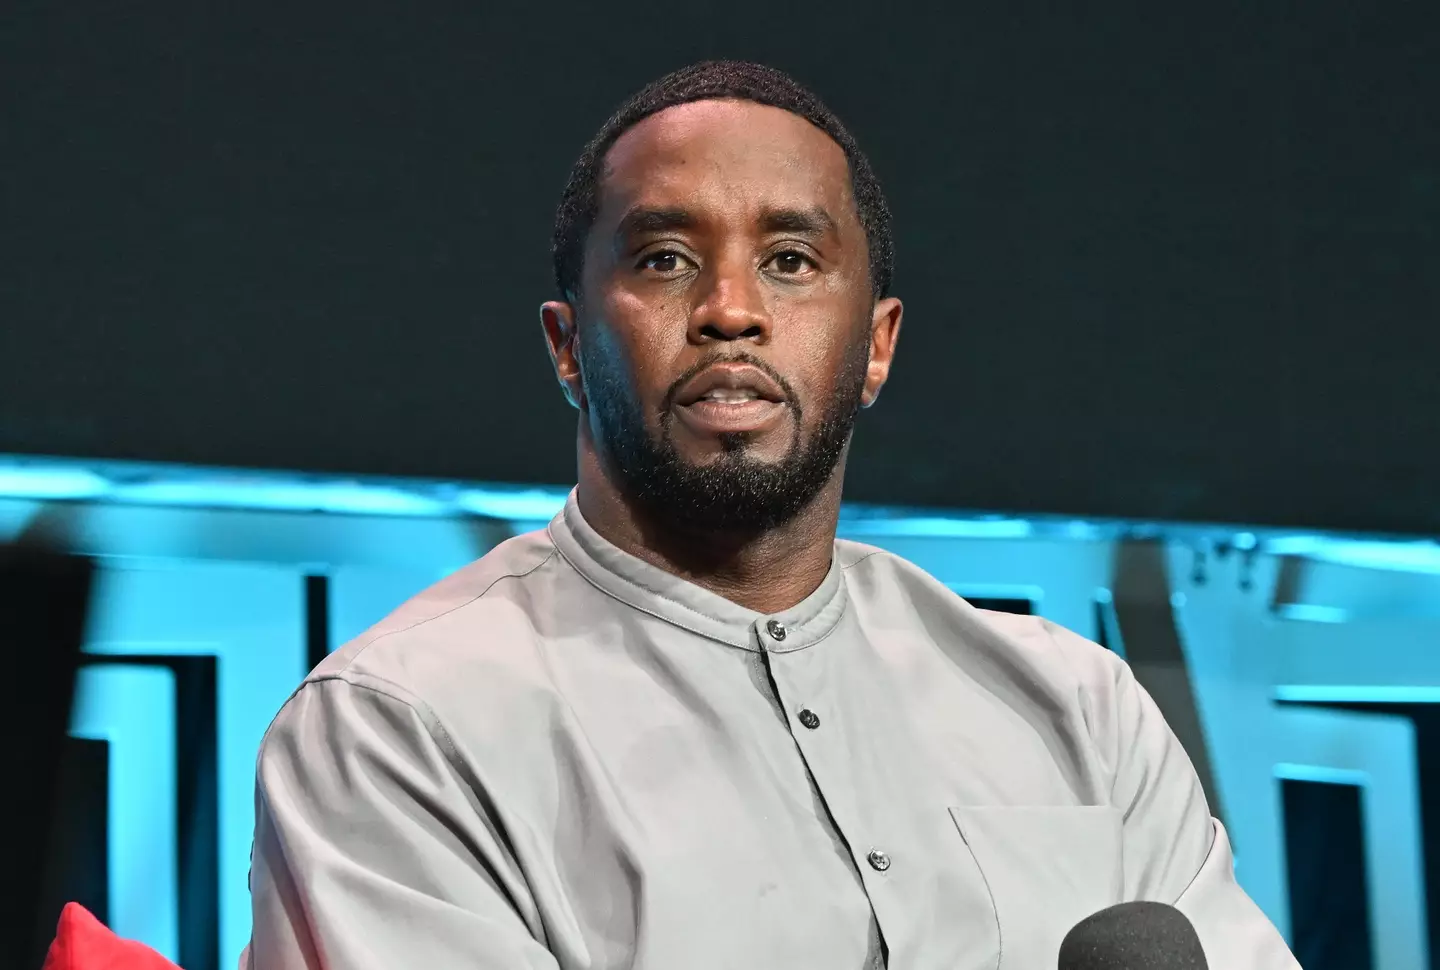 Diddy's homes were raided as part of the investigation. Paras Griffin/Getty Images